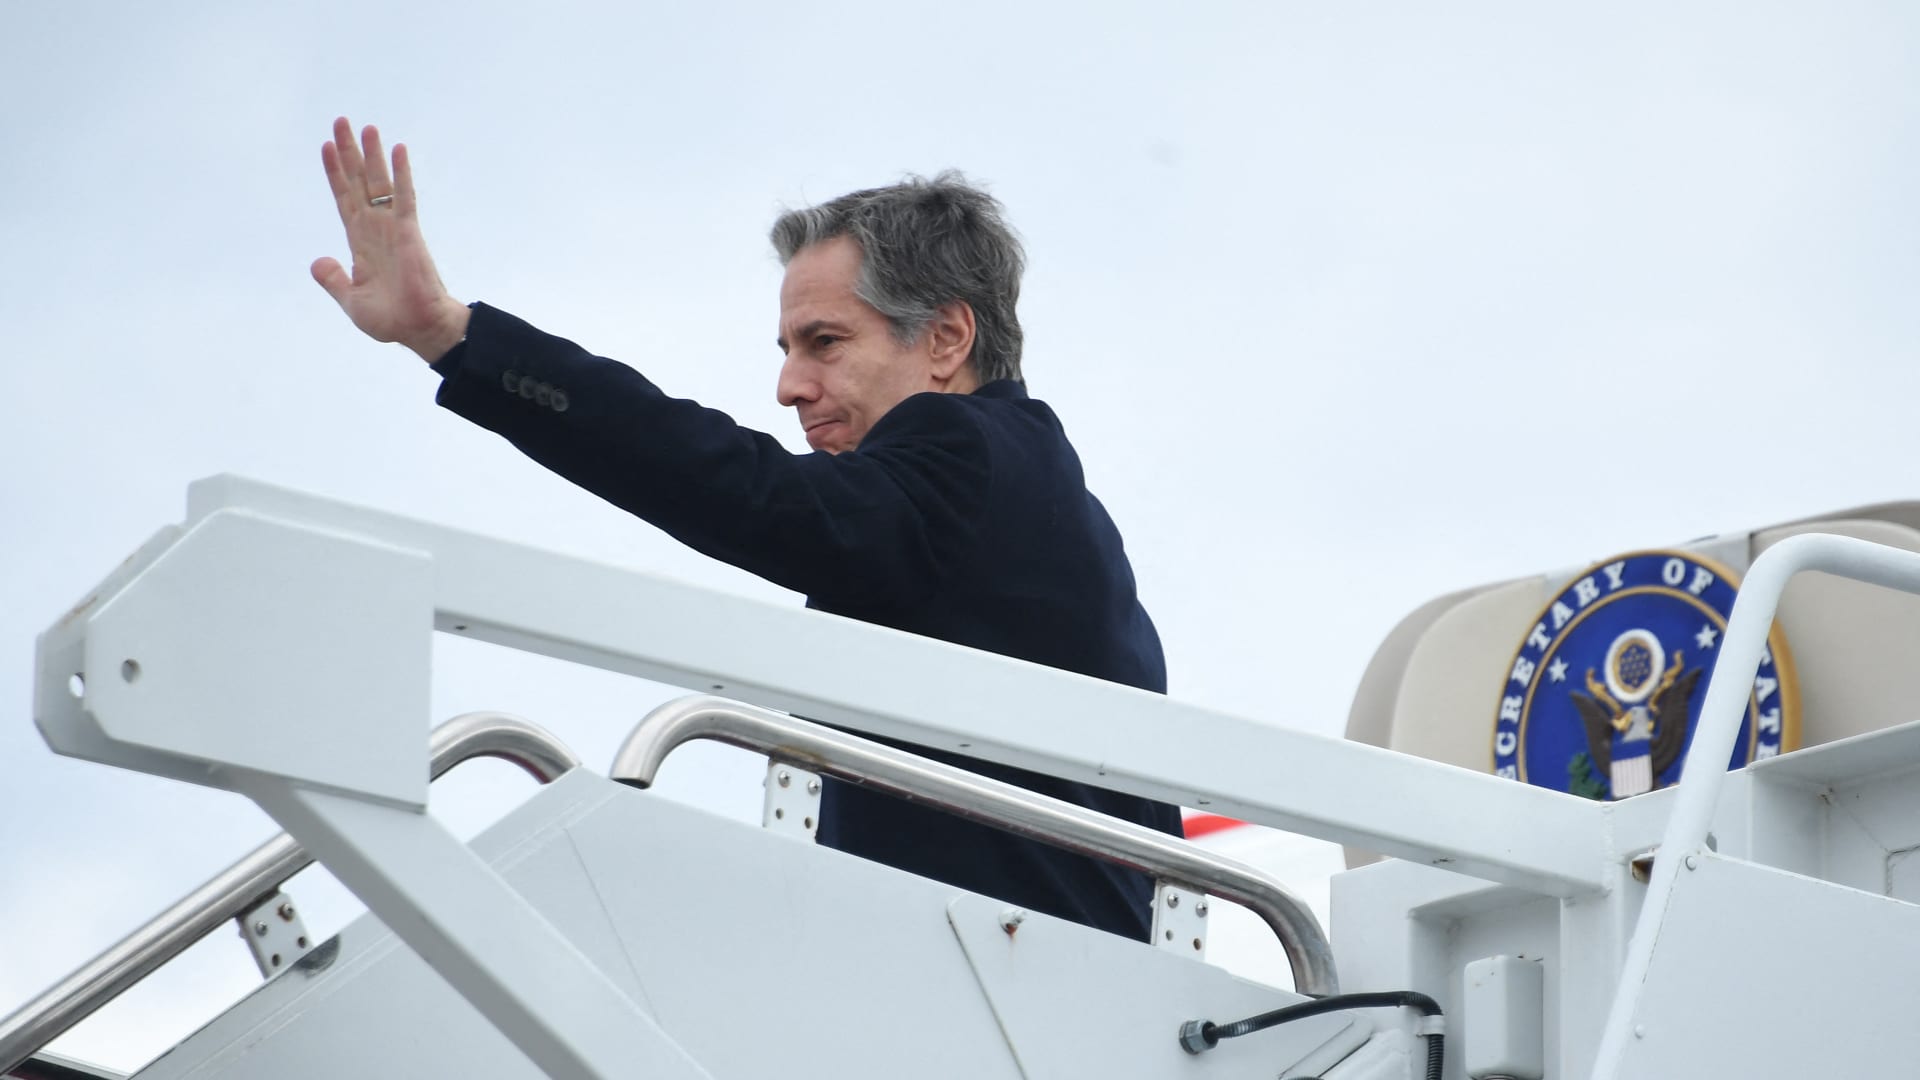 US Secretary of State Antony Blinken boards a military aircraft prior to departure from Joint Base Andrews in Maryland, March 3, 2022.